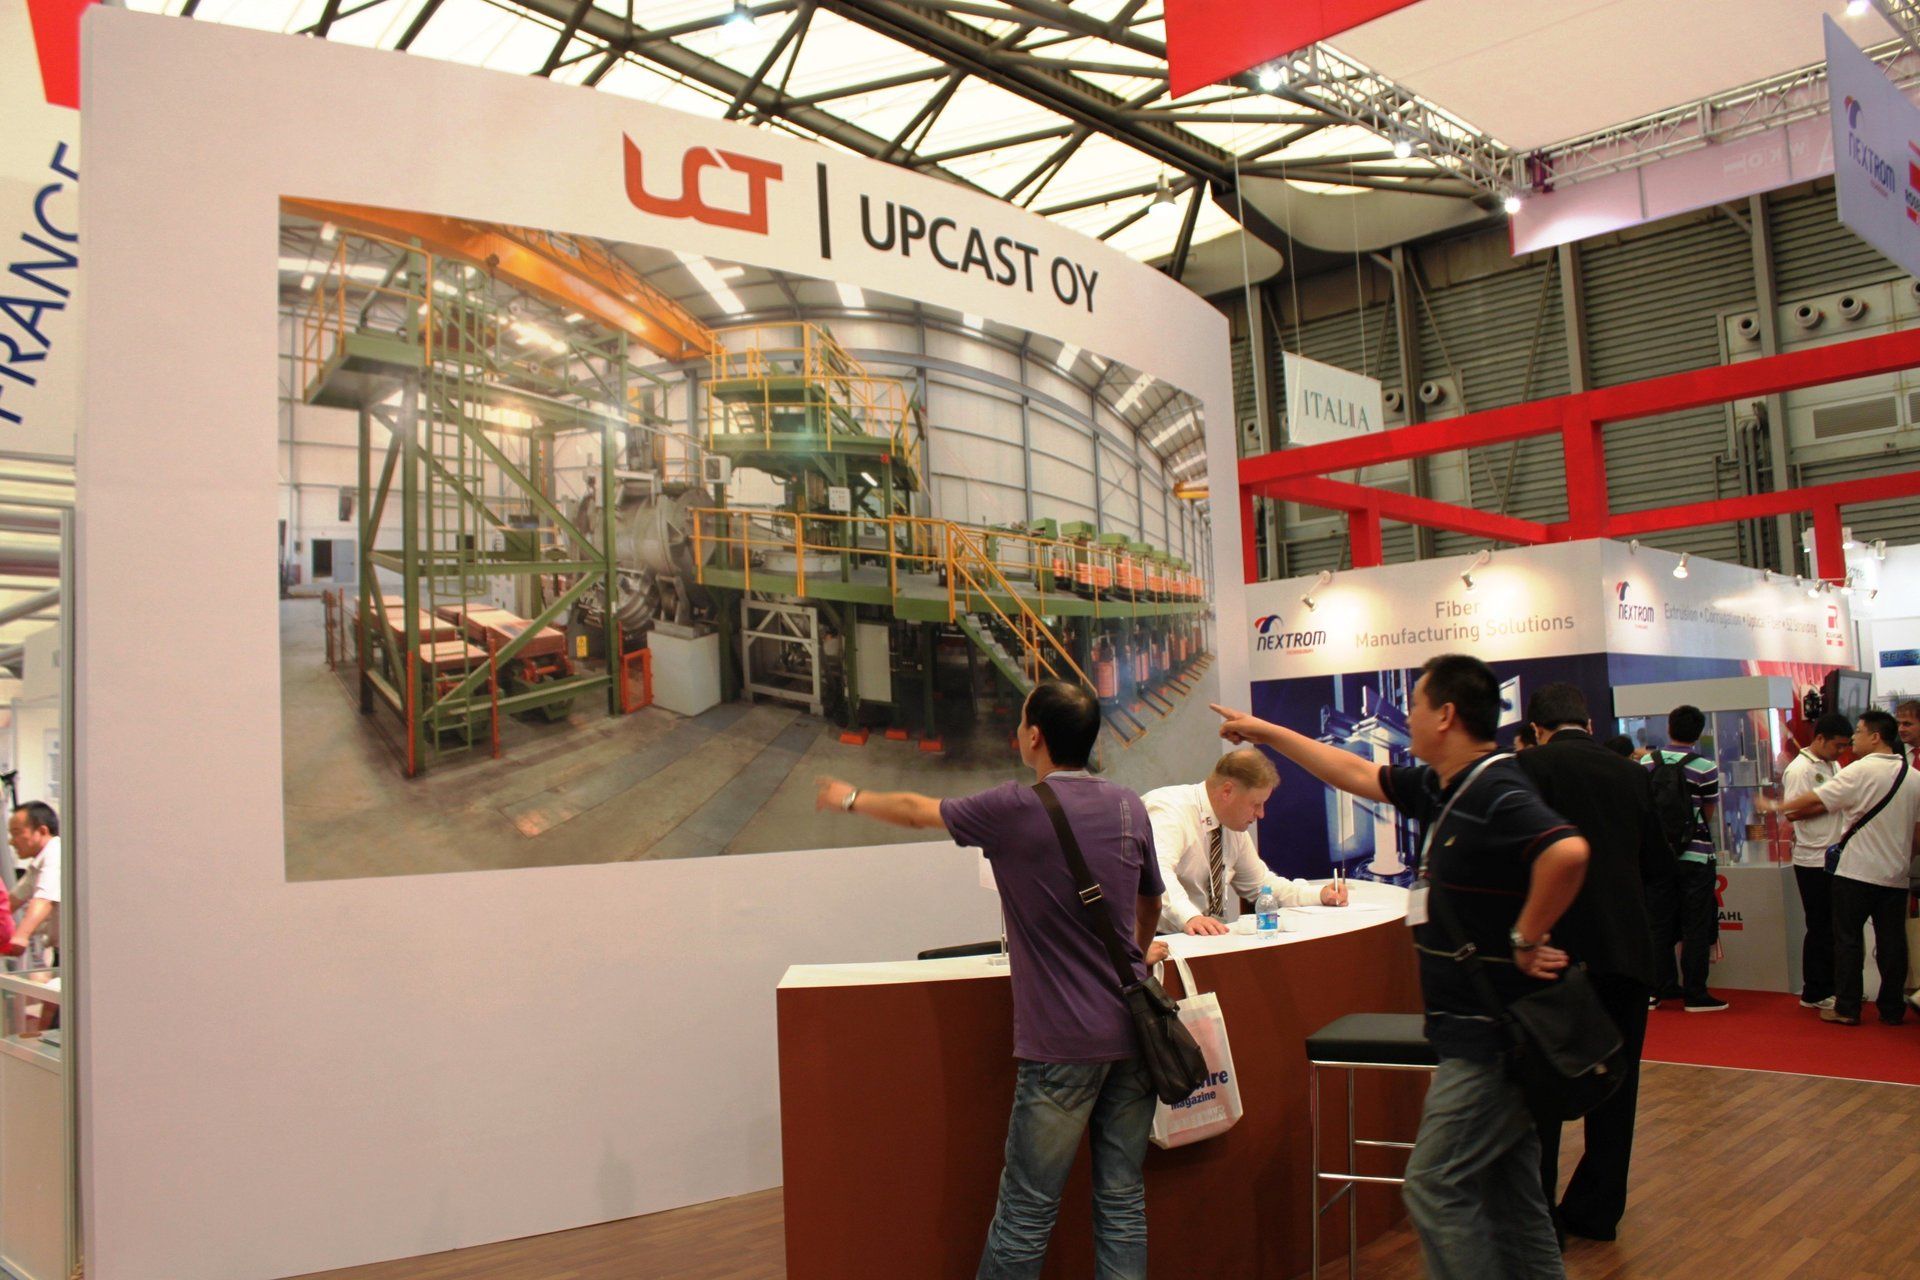 Upcast @ WIRE China 2010. Booth designed and built by Essential Global Fairs.